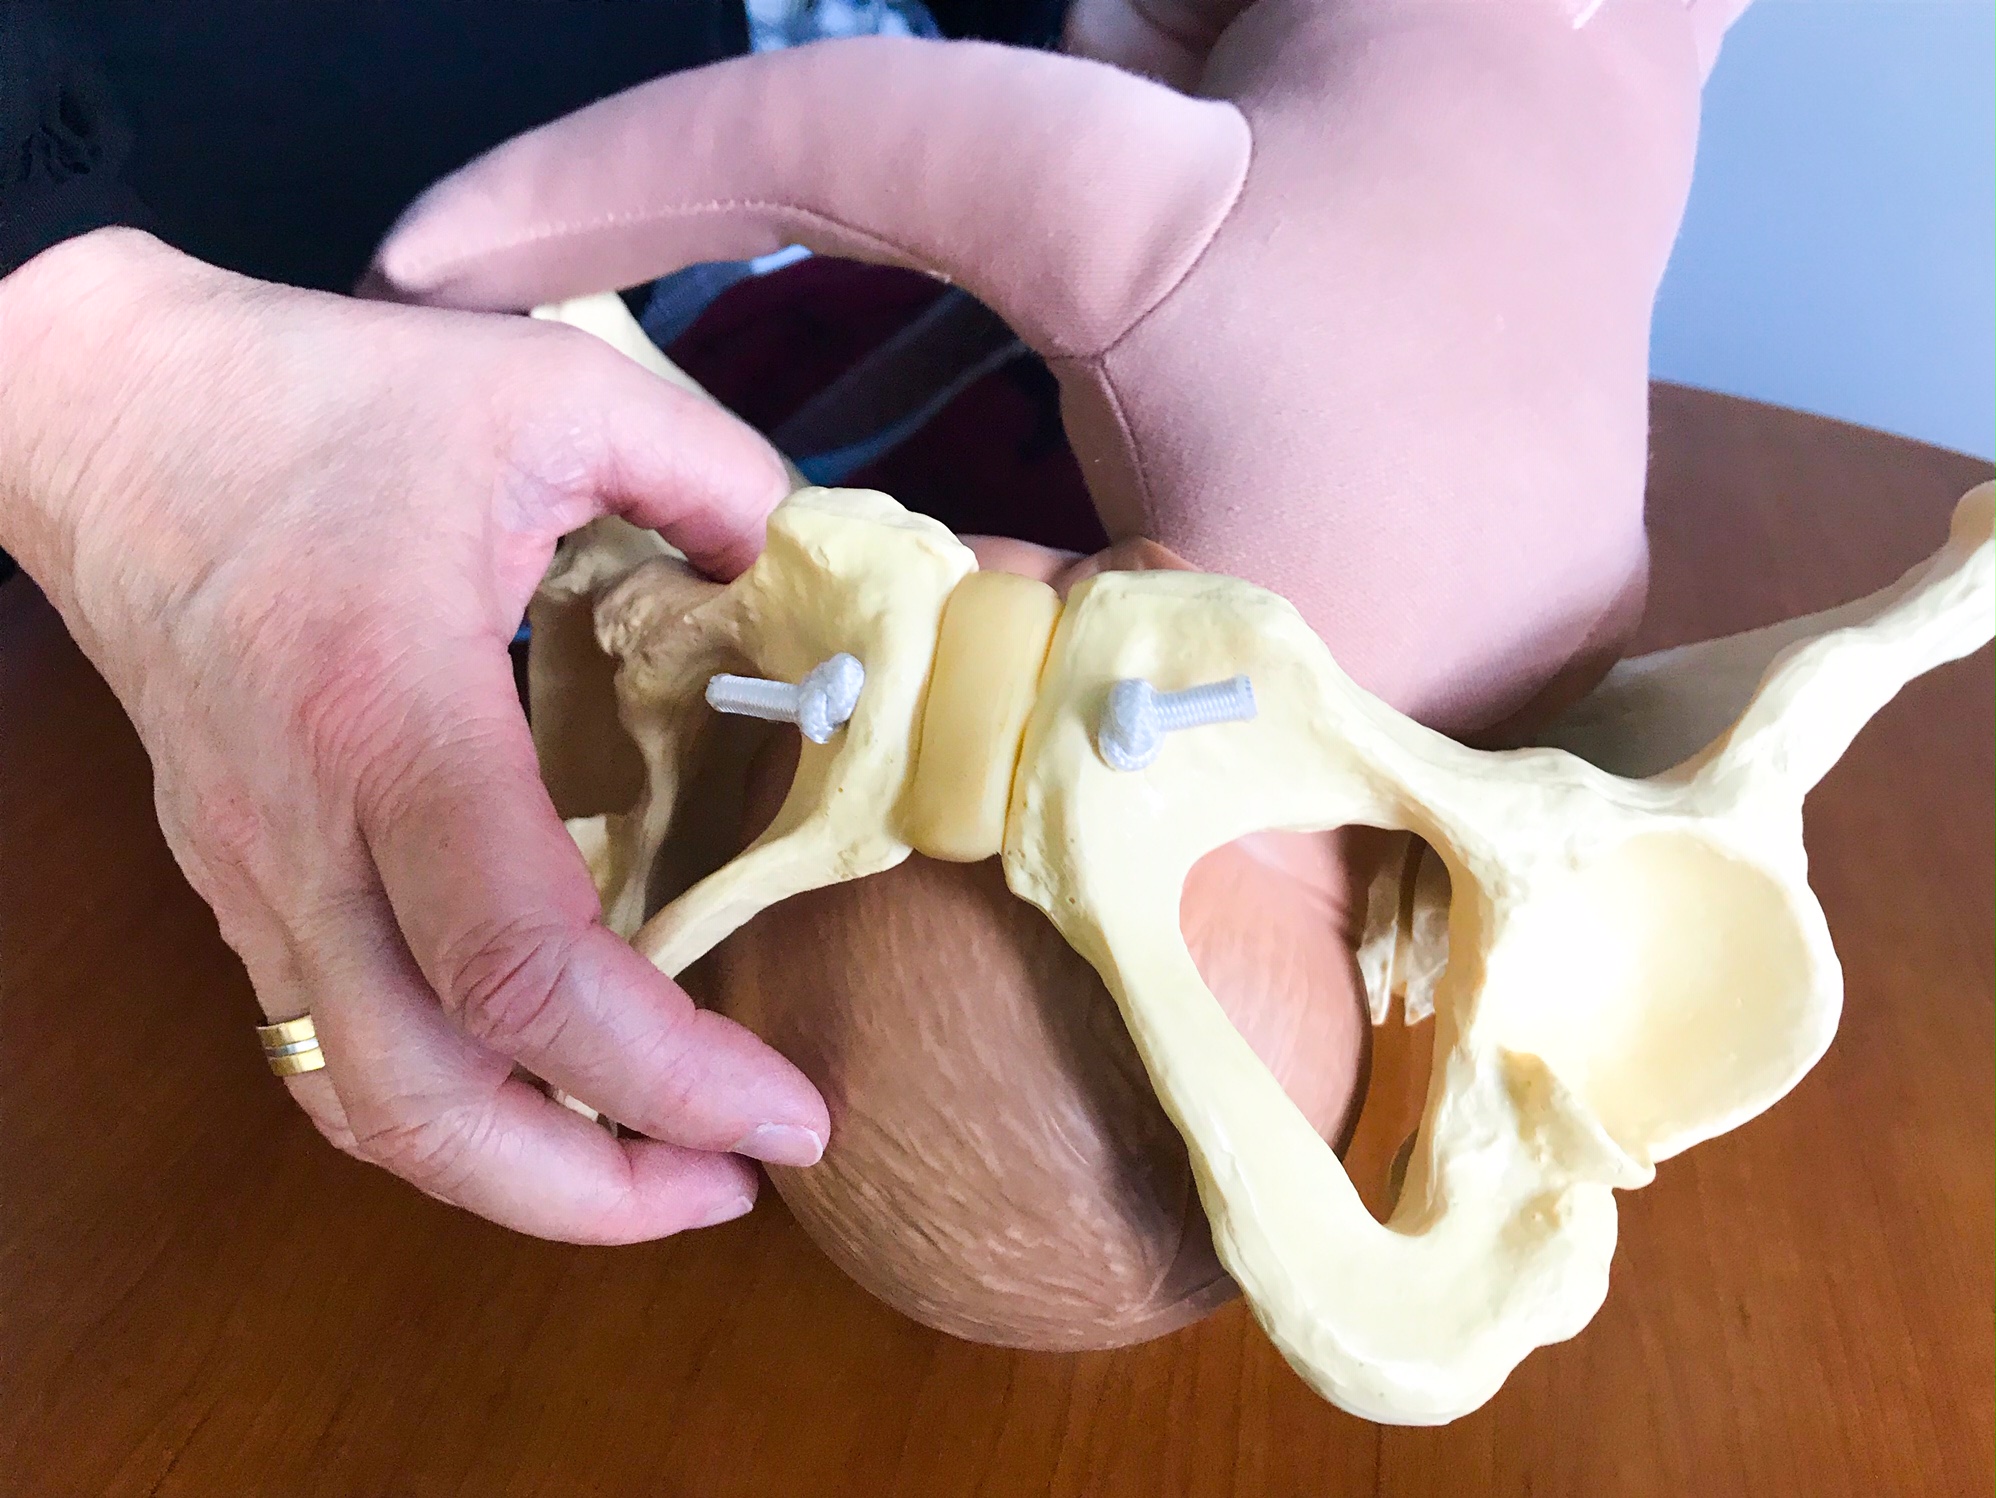 A doll and model pelvis are used to demonstrate the birth process.